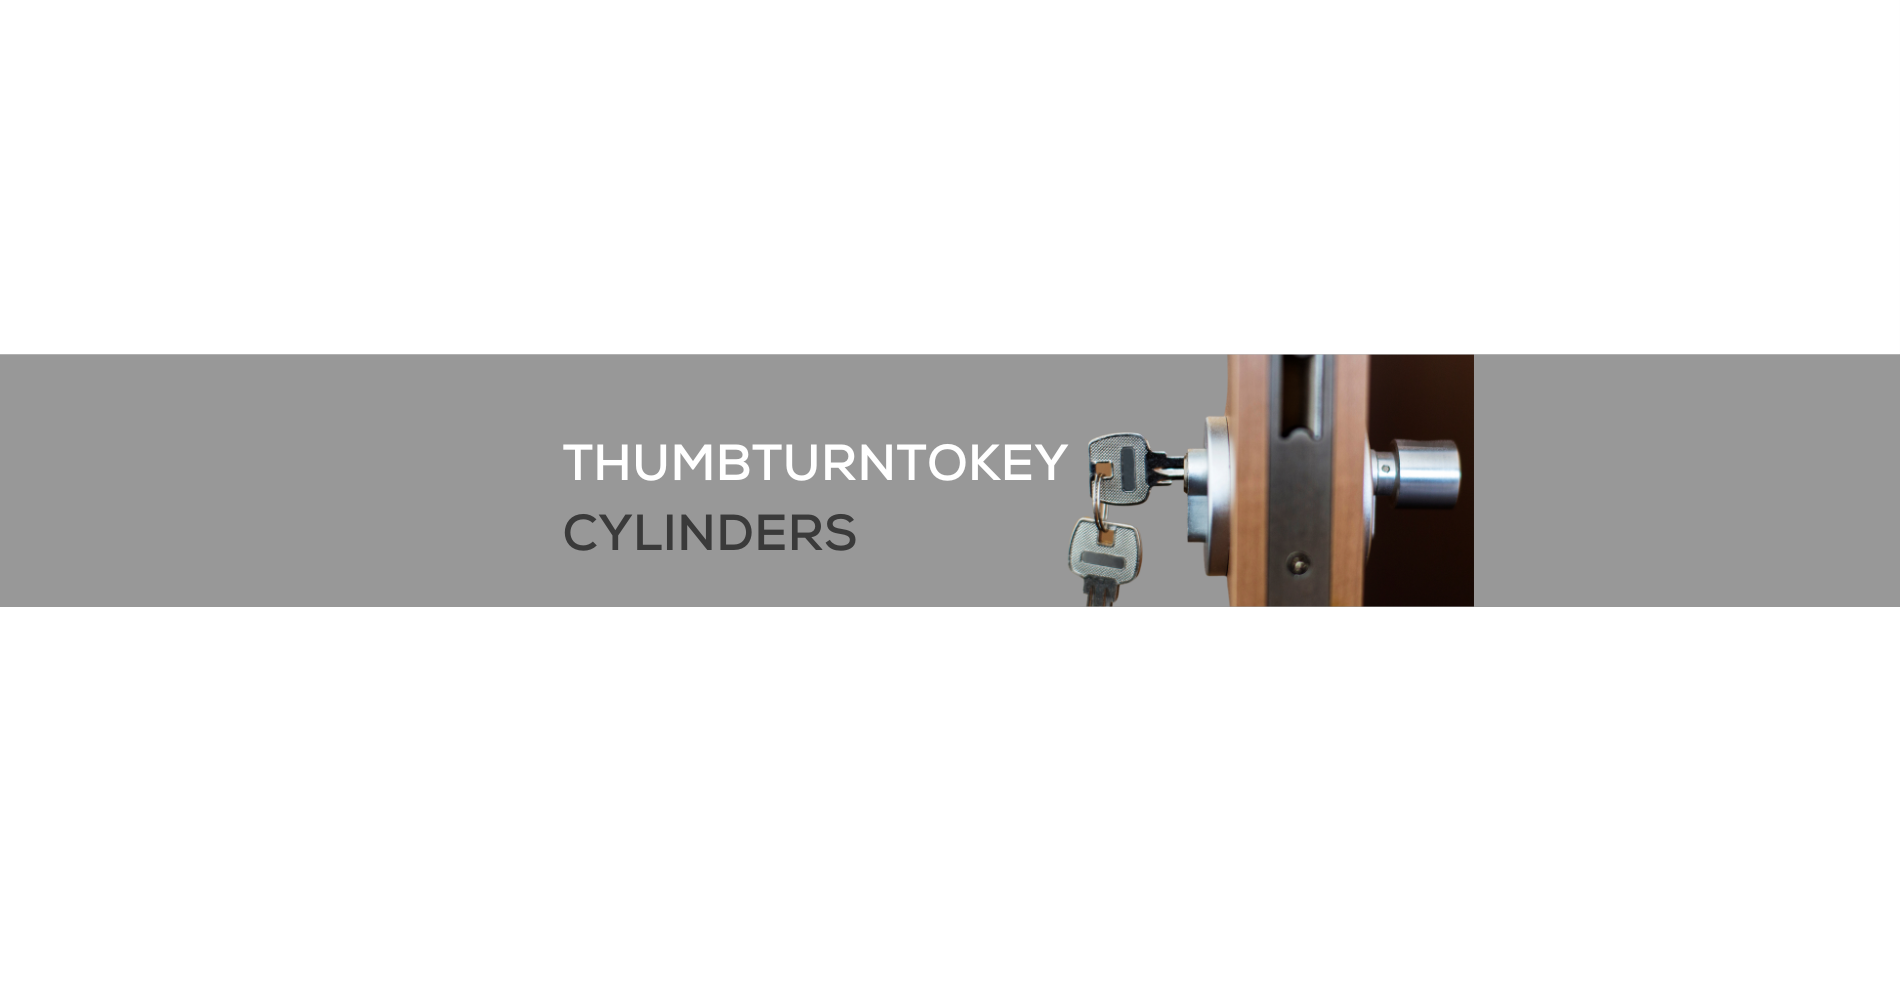 THUMBTURN TO KEY CYLINDERS